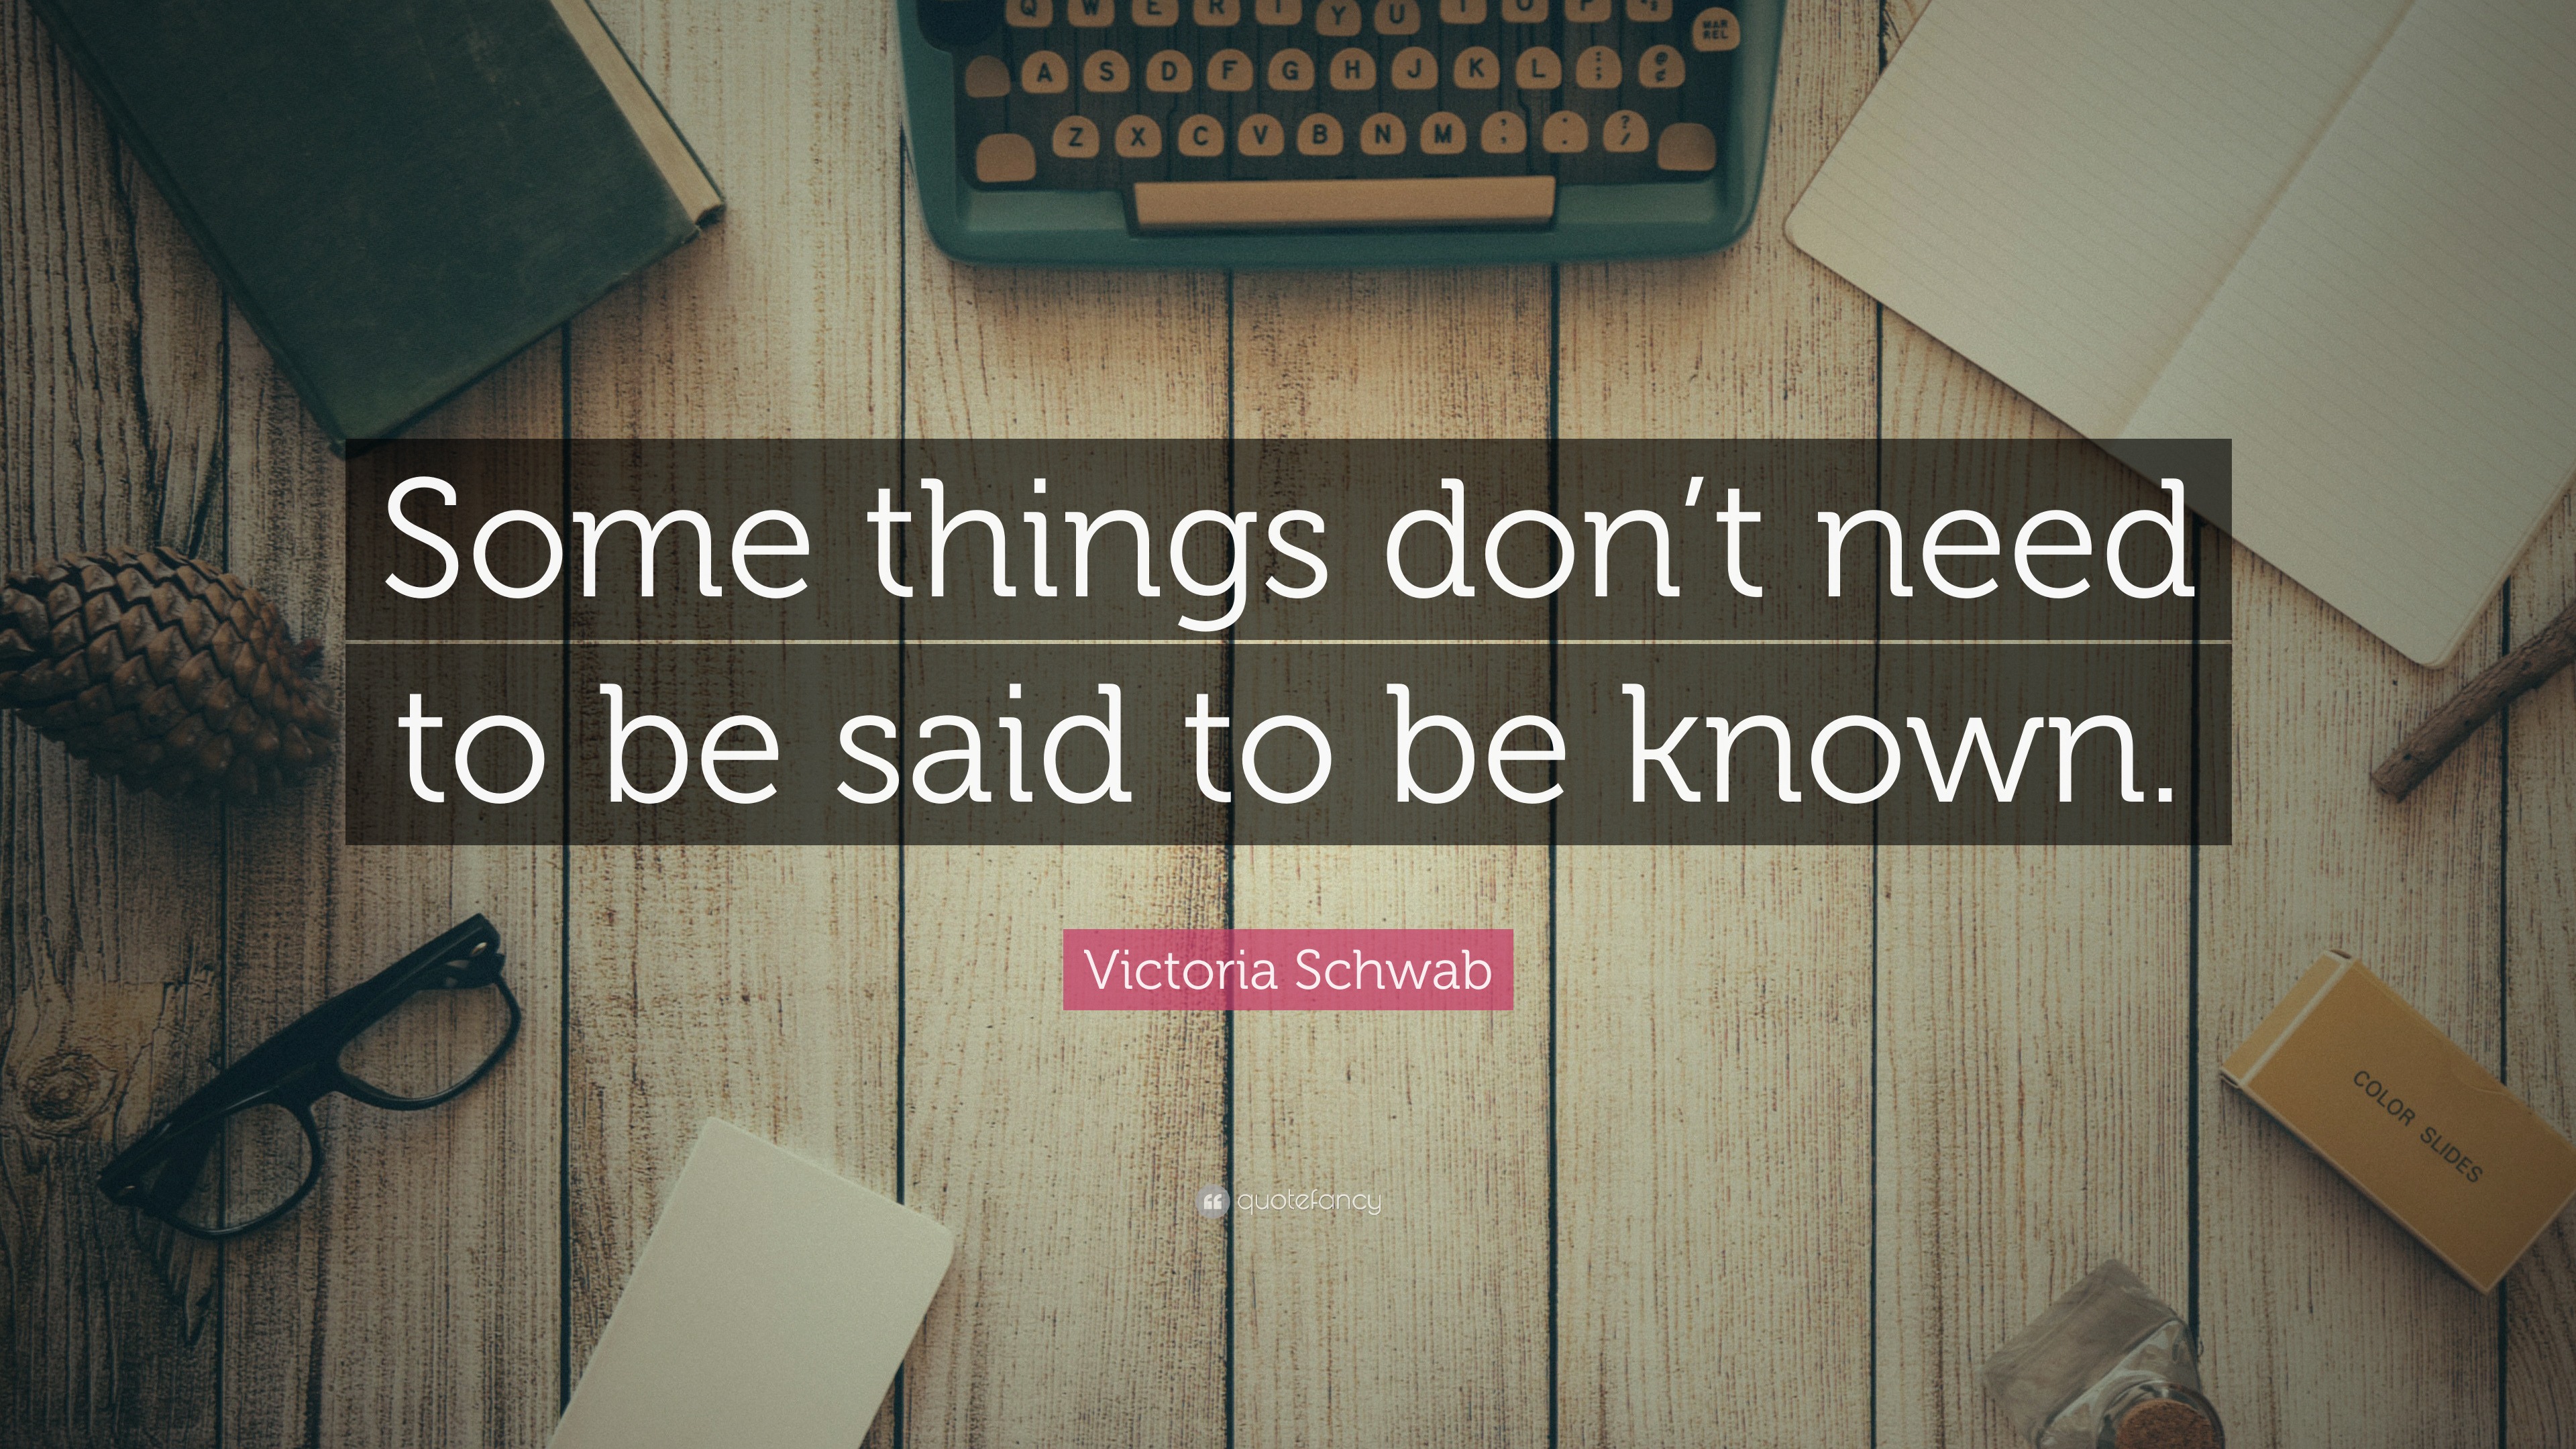 6631419-Victoria-Schwab-Quote-Some-things-don-t-need-to-be-said-to-be.jpg